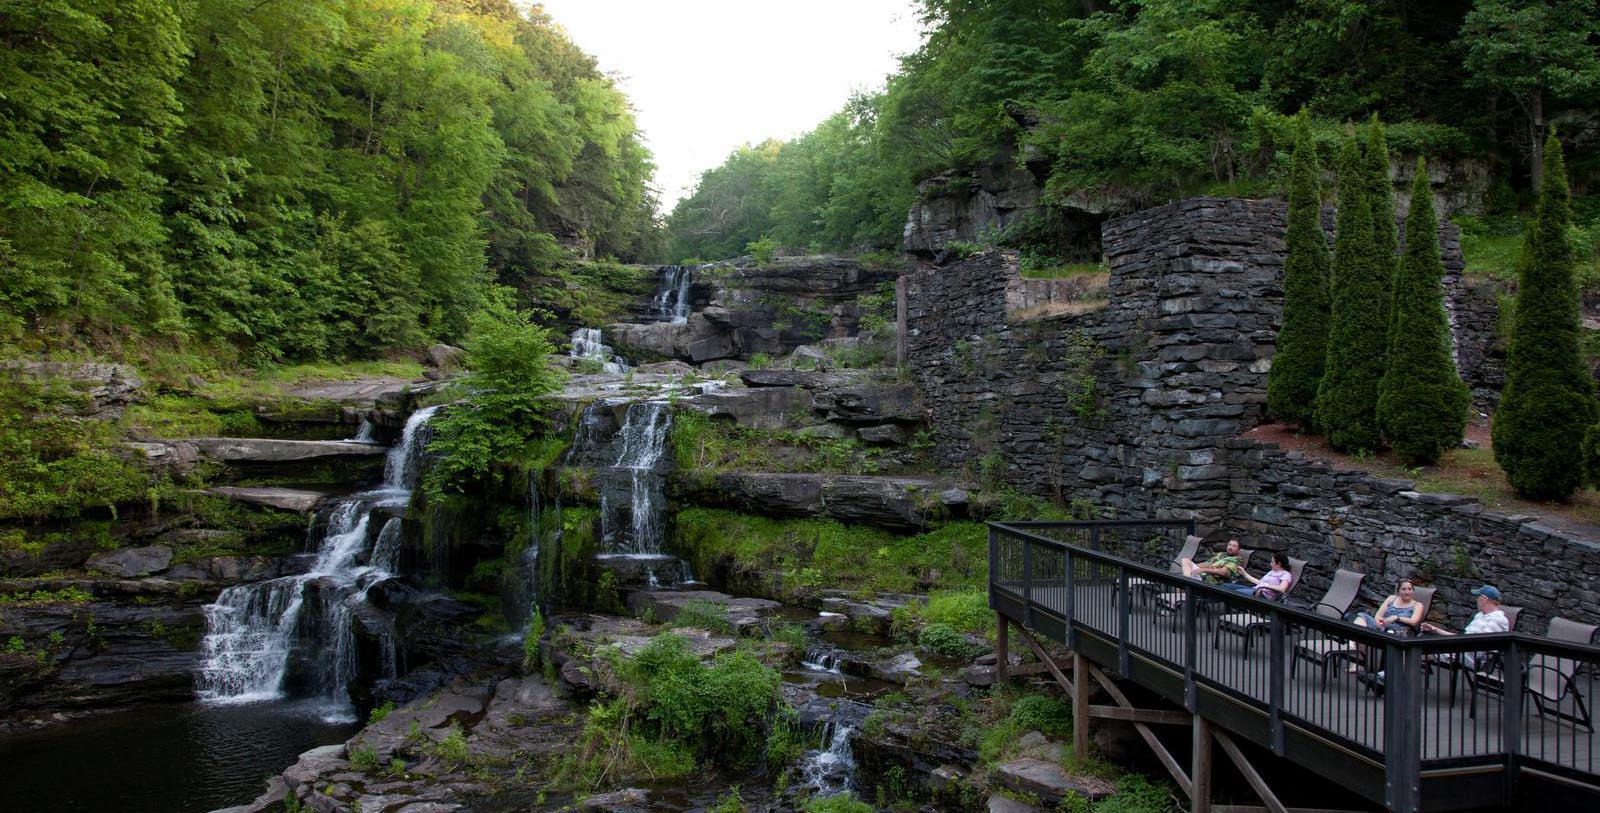 Take a day to explore the shores of Lake Wallenpaupack in Pennsylvania’s Pocono Mountains and nearby discover the Dorflinger Glass Museum.